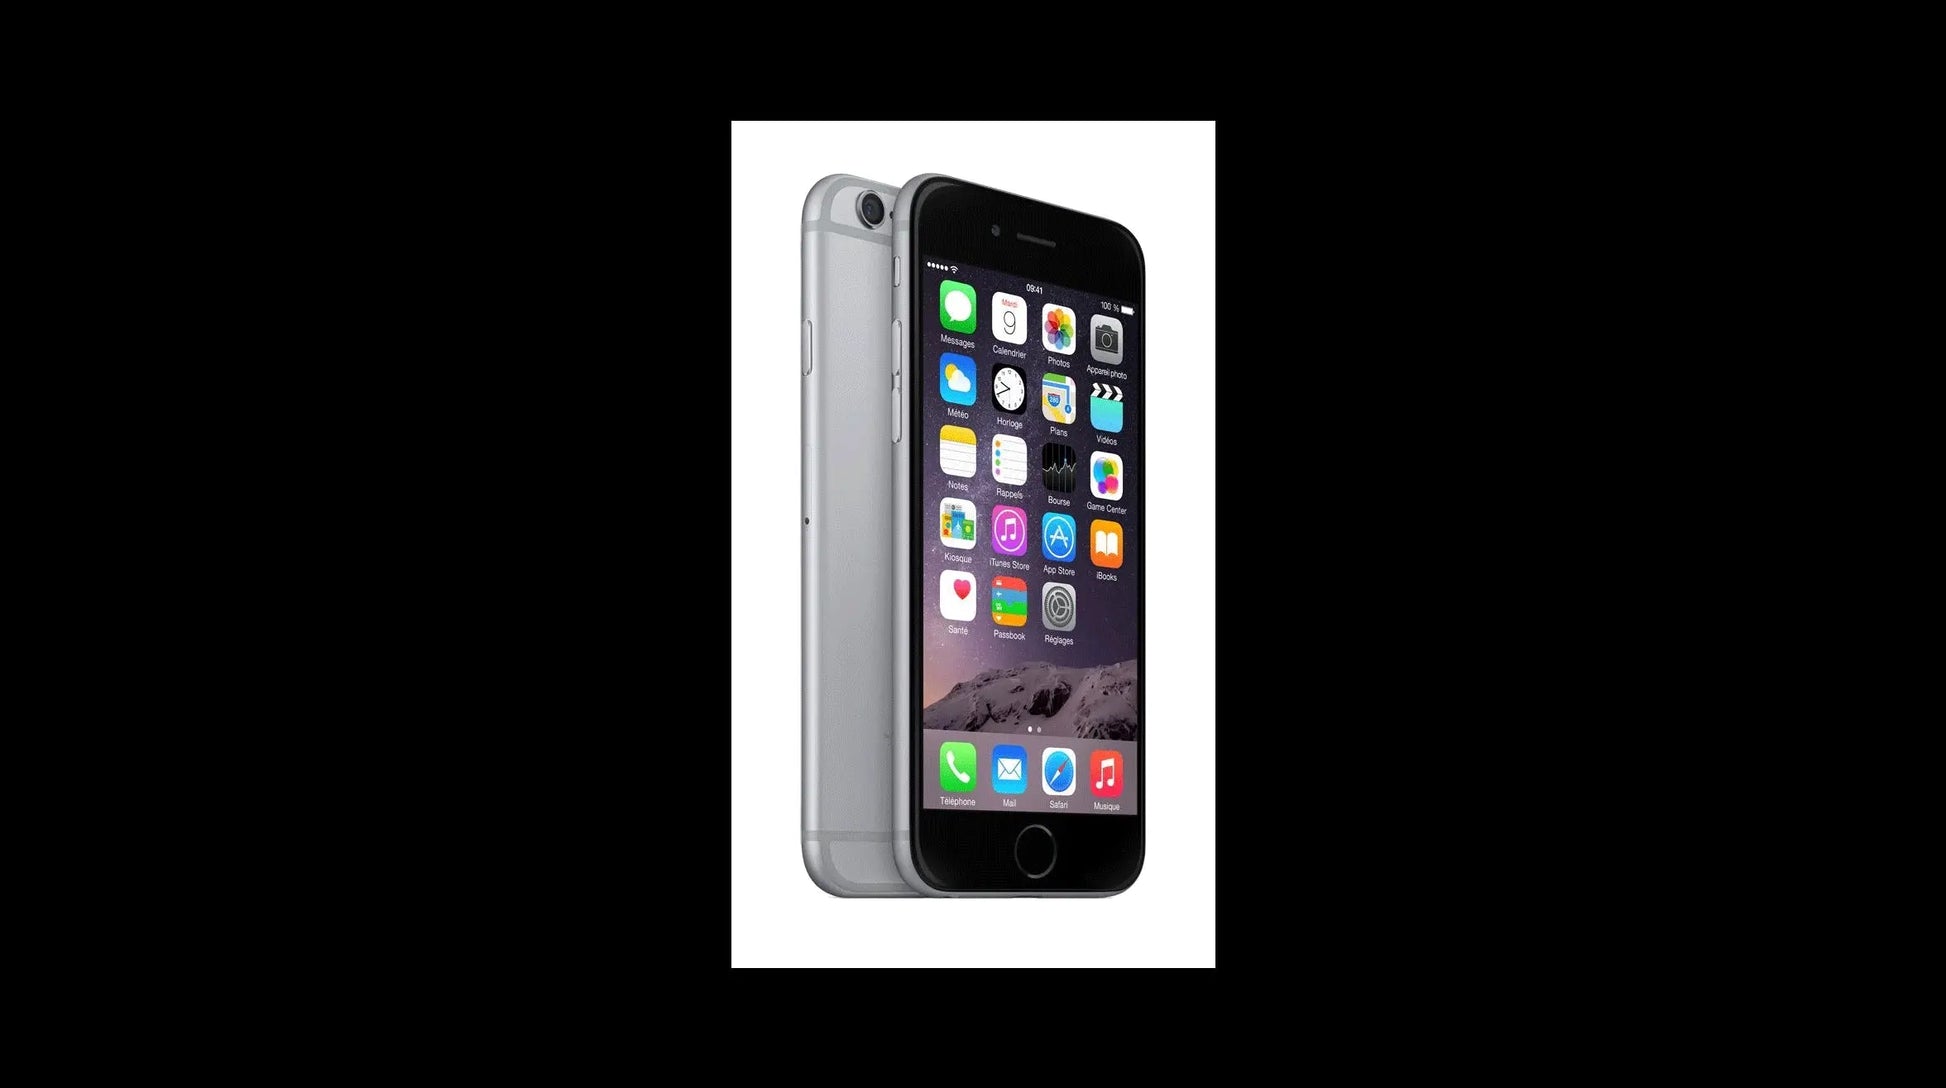 iPhone 6S (gris sideral ) - 128 Go Apple Computer, Inc